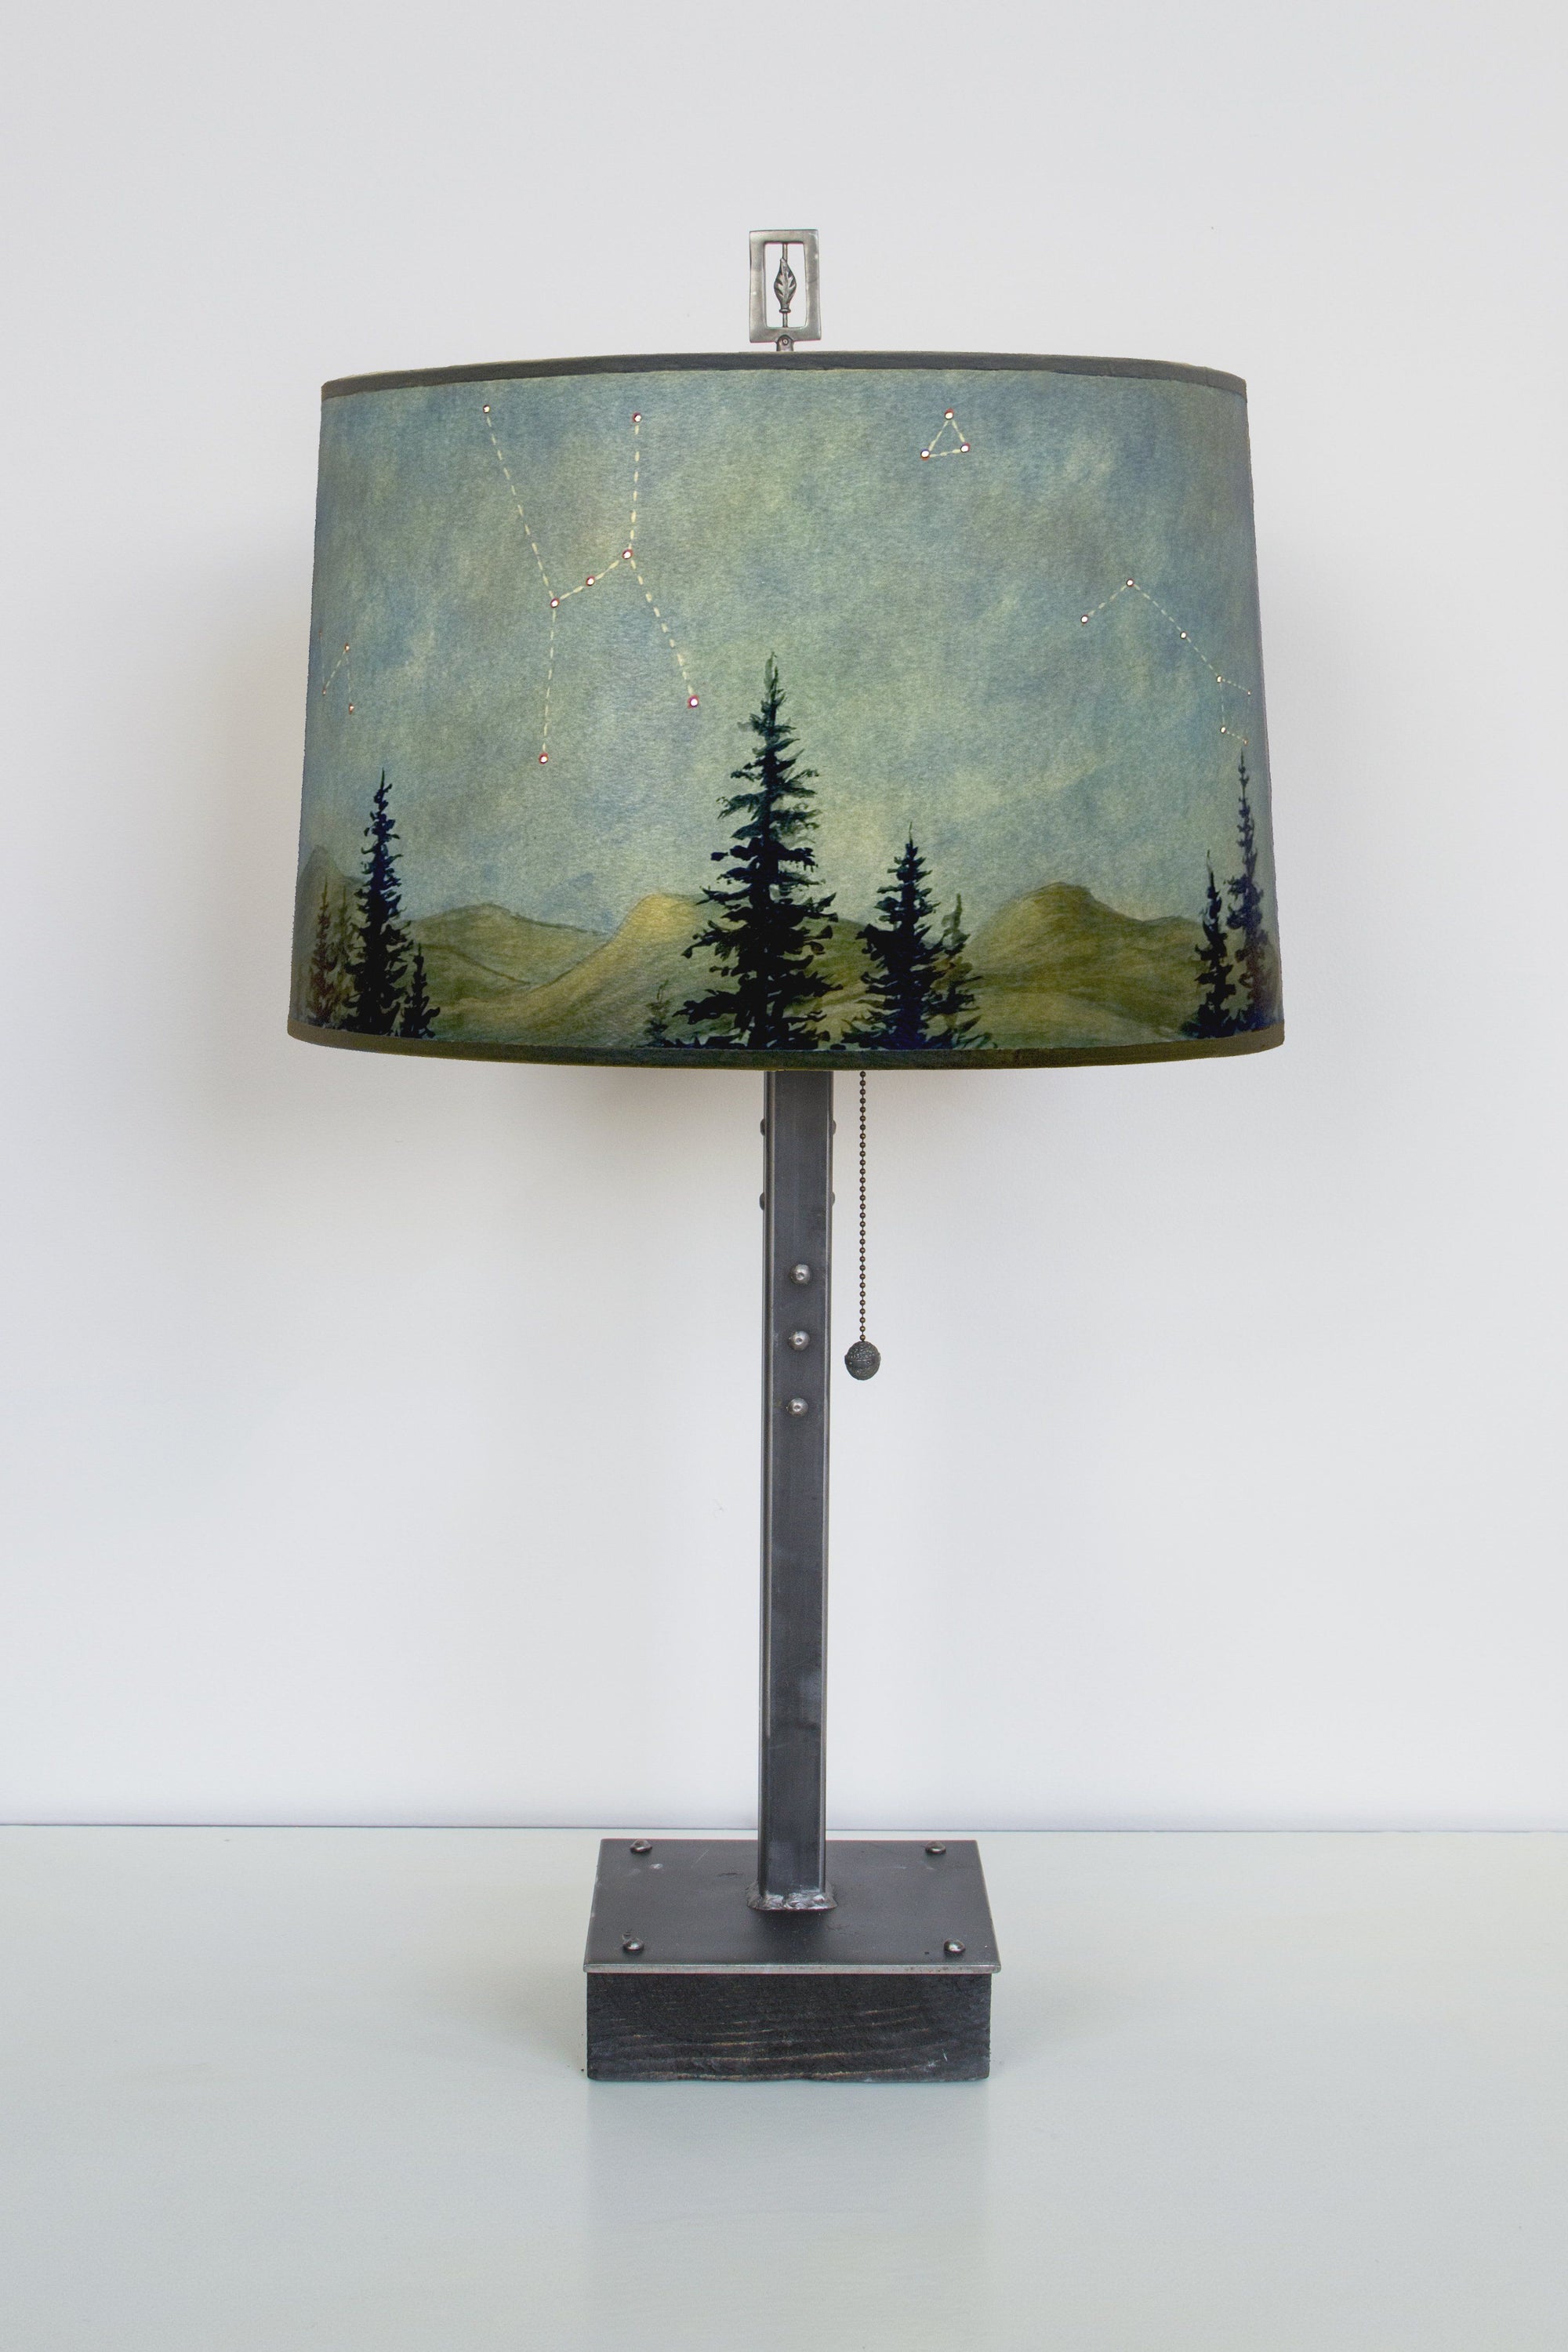 Janna Ugone & Co Table Lamps Steel Table Lamp on Wood with Large Drum Shade in Midnight Sky